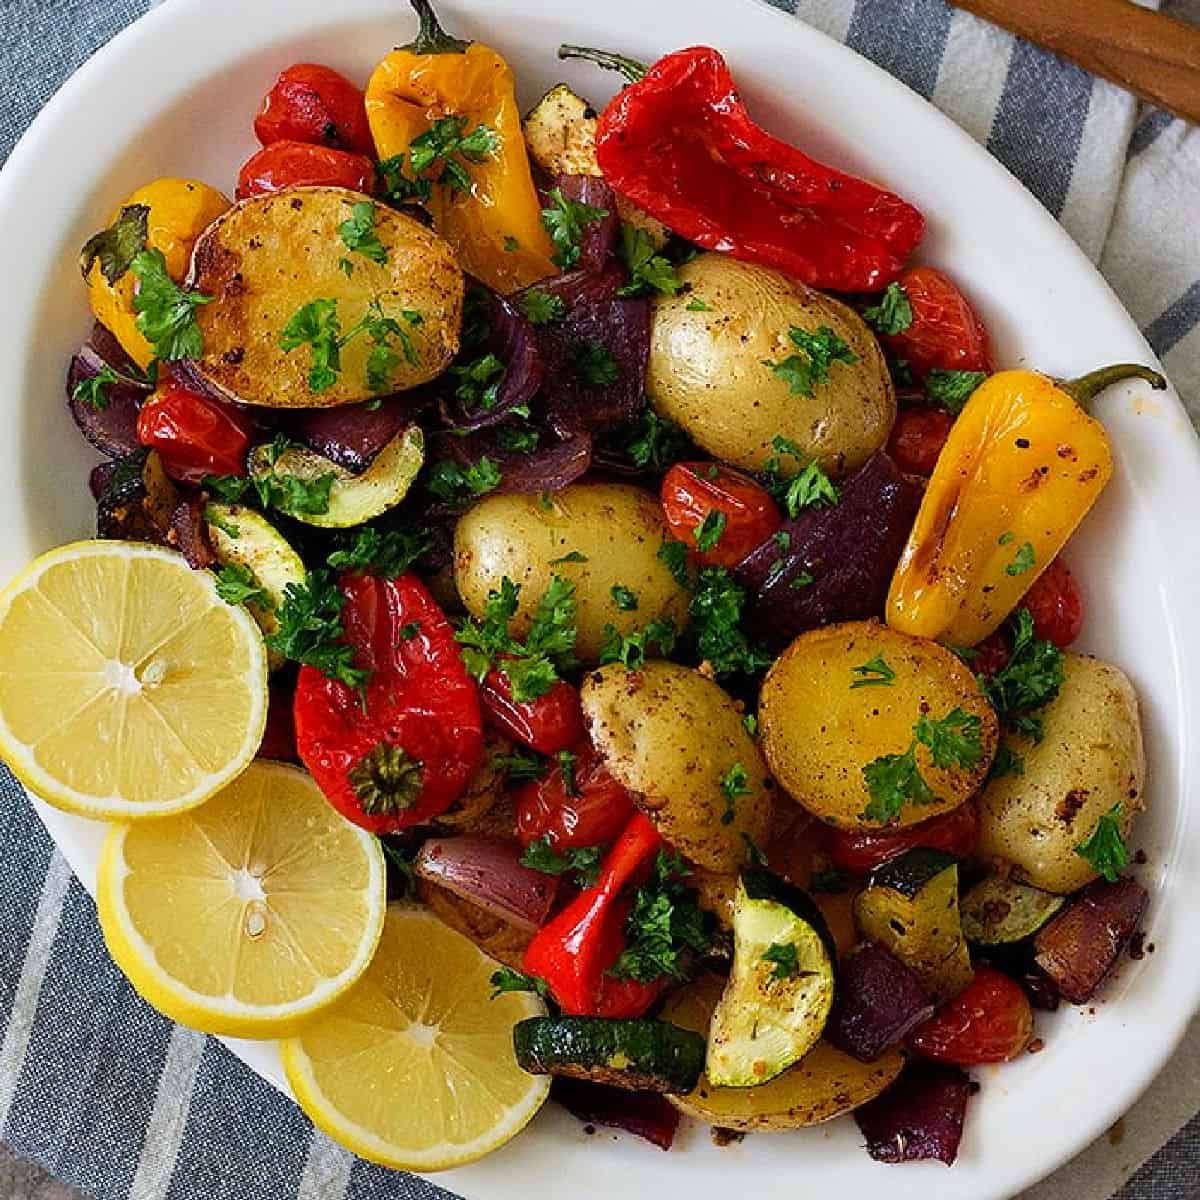 Mediterranean style oven roasted vegetables are so simple, yet hearty and delicious. They make for a wonderful side dish that's packed with flavor.